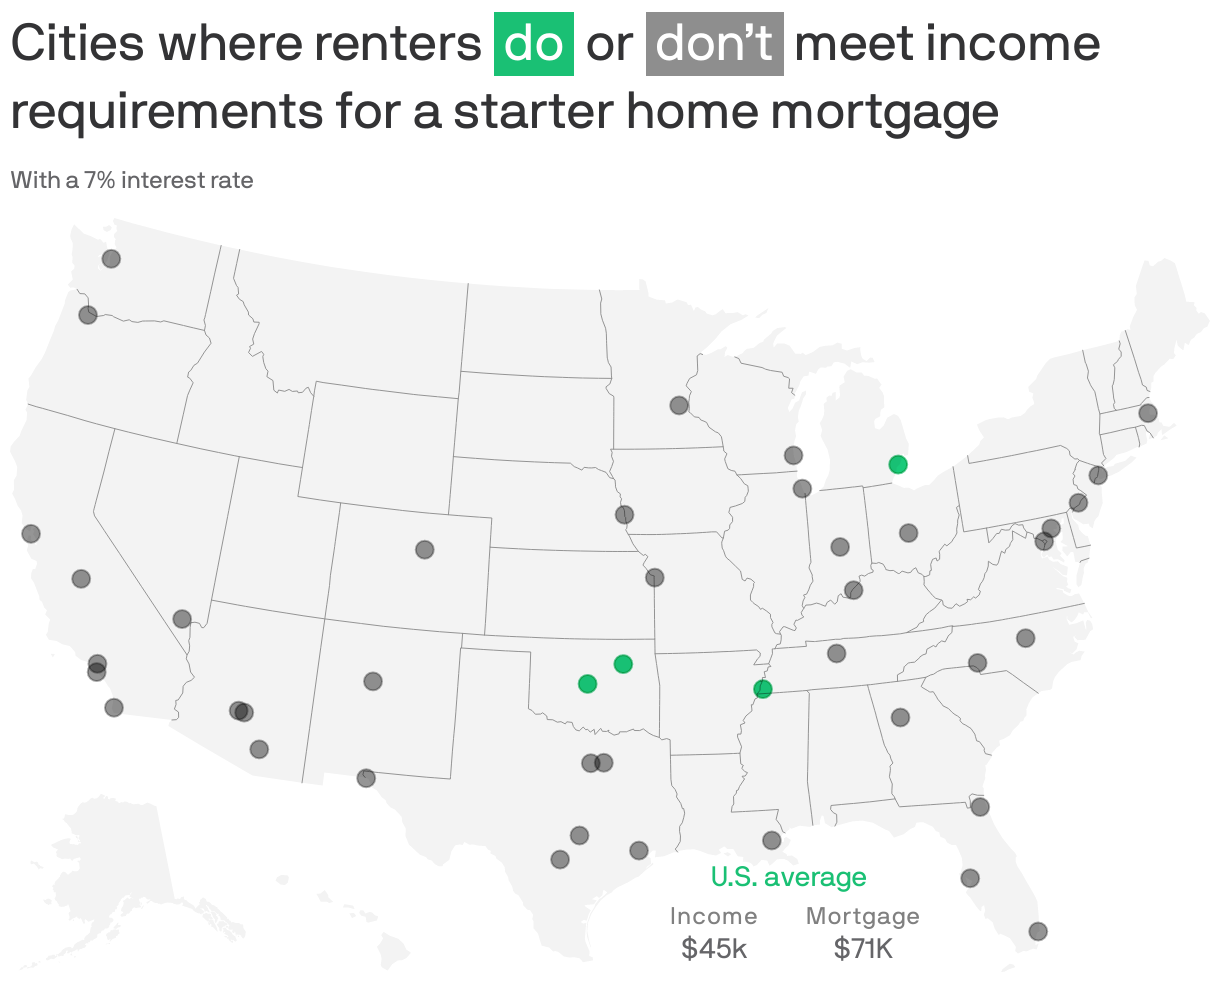 Cities where renters <span style="background:  #1ac074; padding:3px 5px;color:white;">do</span> or  <span style="background: #8e8e8e; padding:3px 5px;color:white;">don’t</span> meet  income requirements for a starter home mortgage